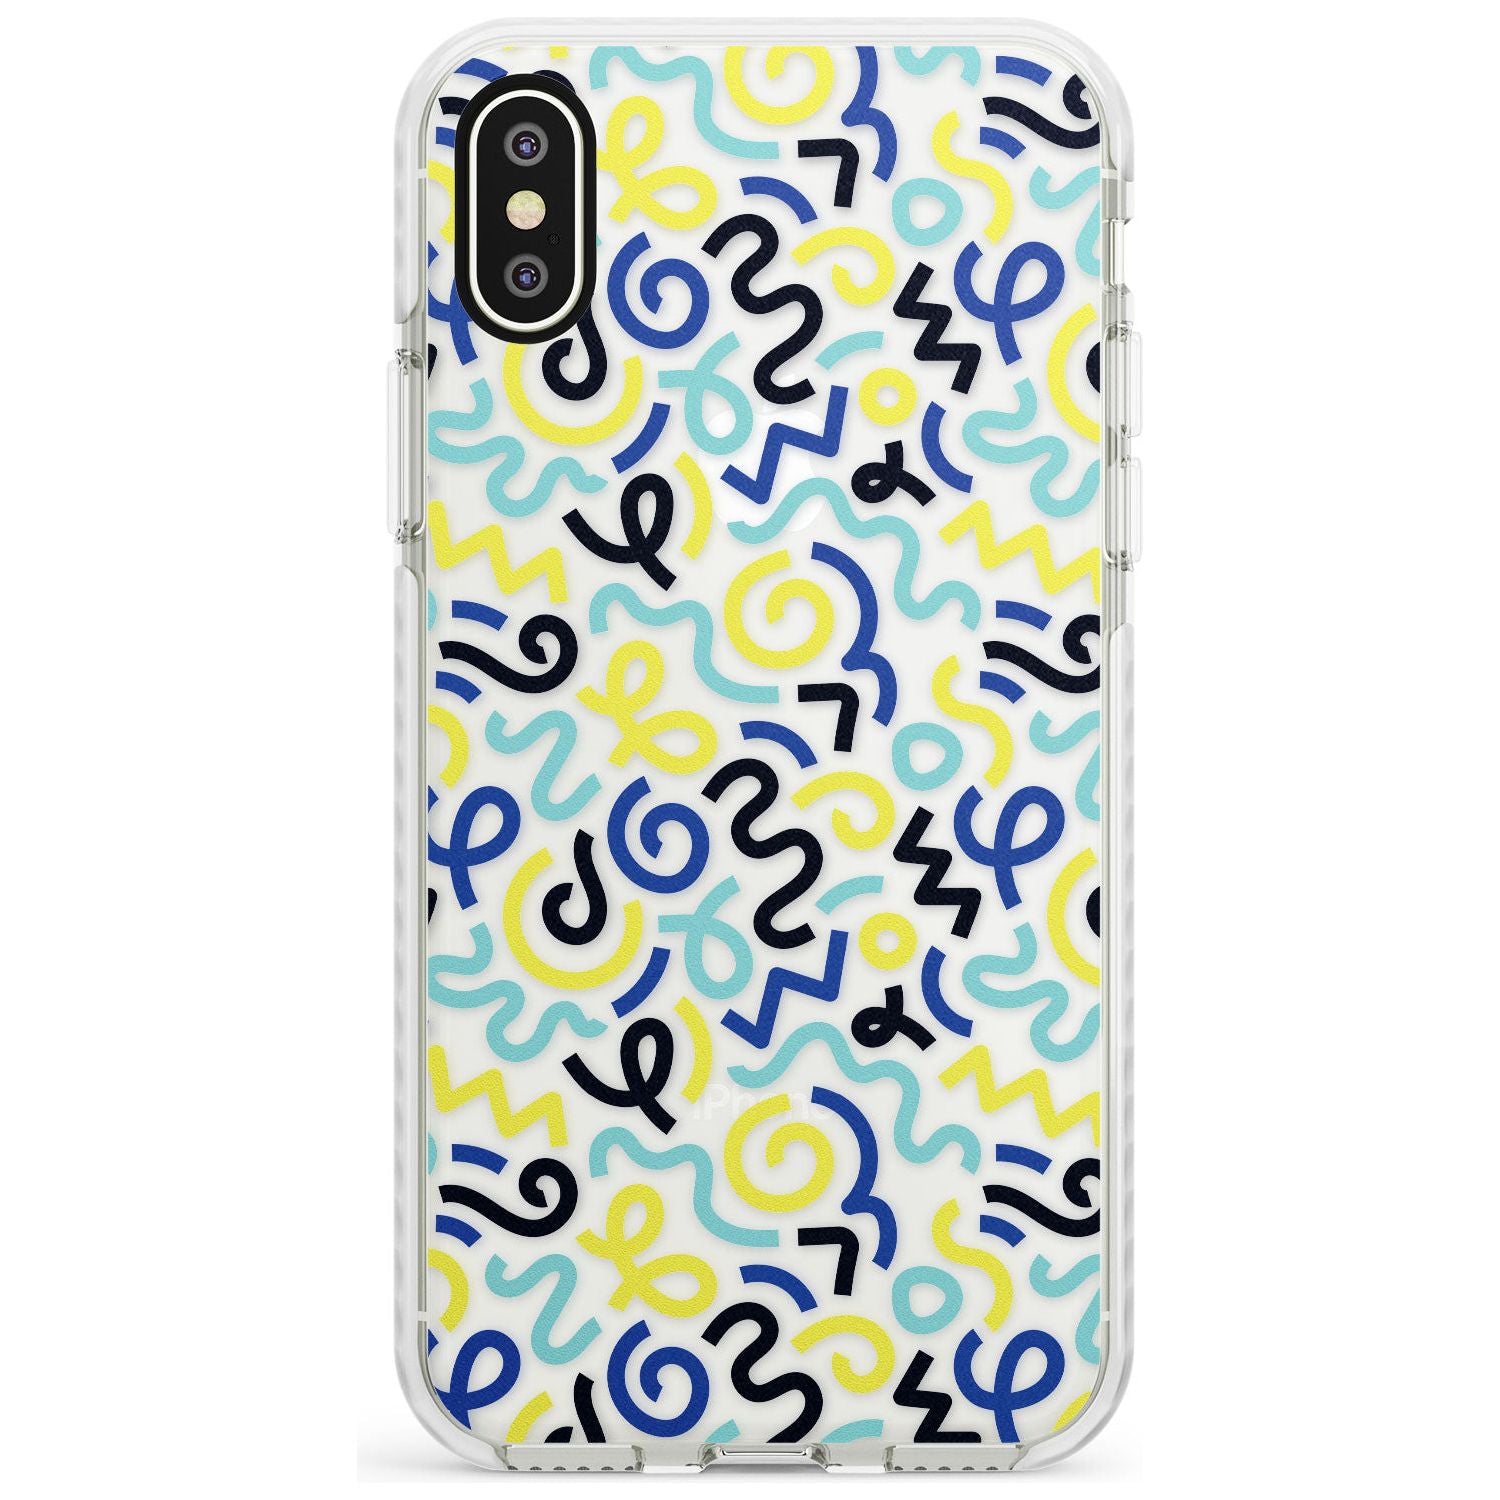 Blue & Yellow Shapes Memphis Retro Pattern Design Impact Phone Case for iPhone X XS Max XR